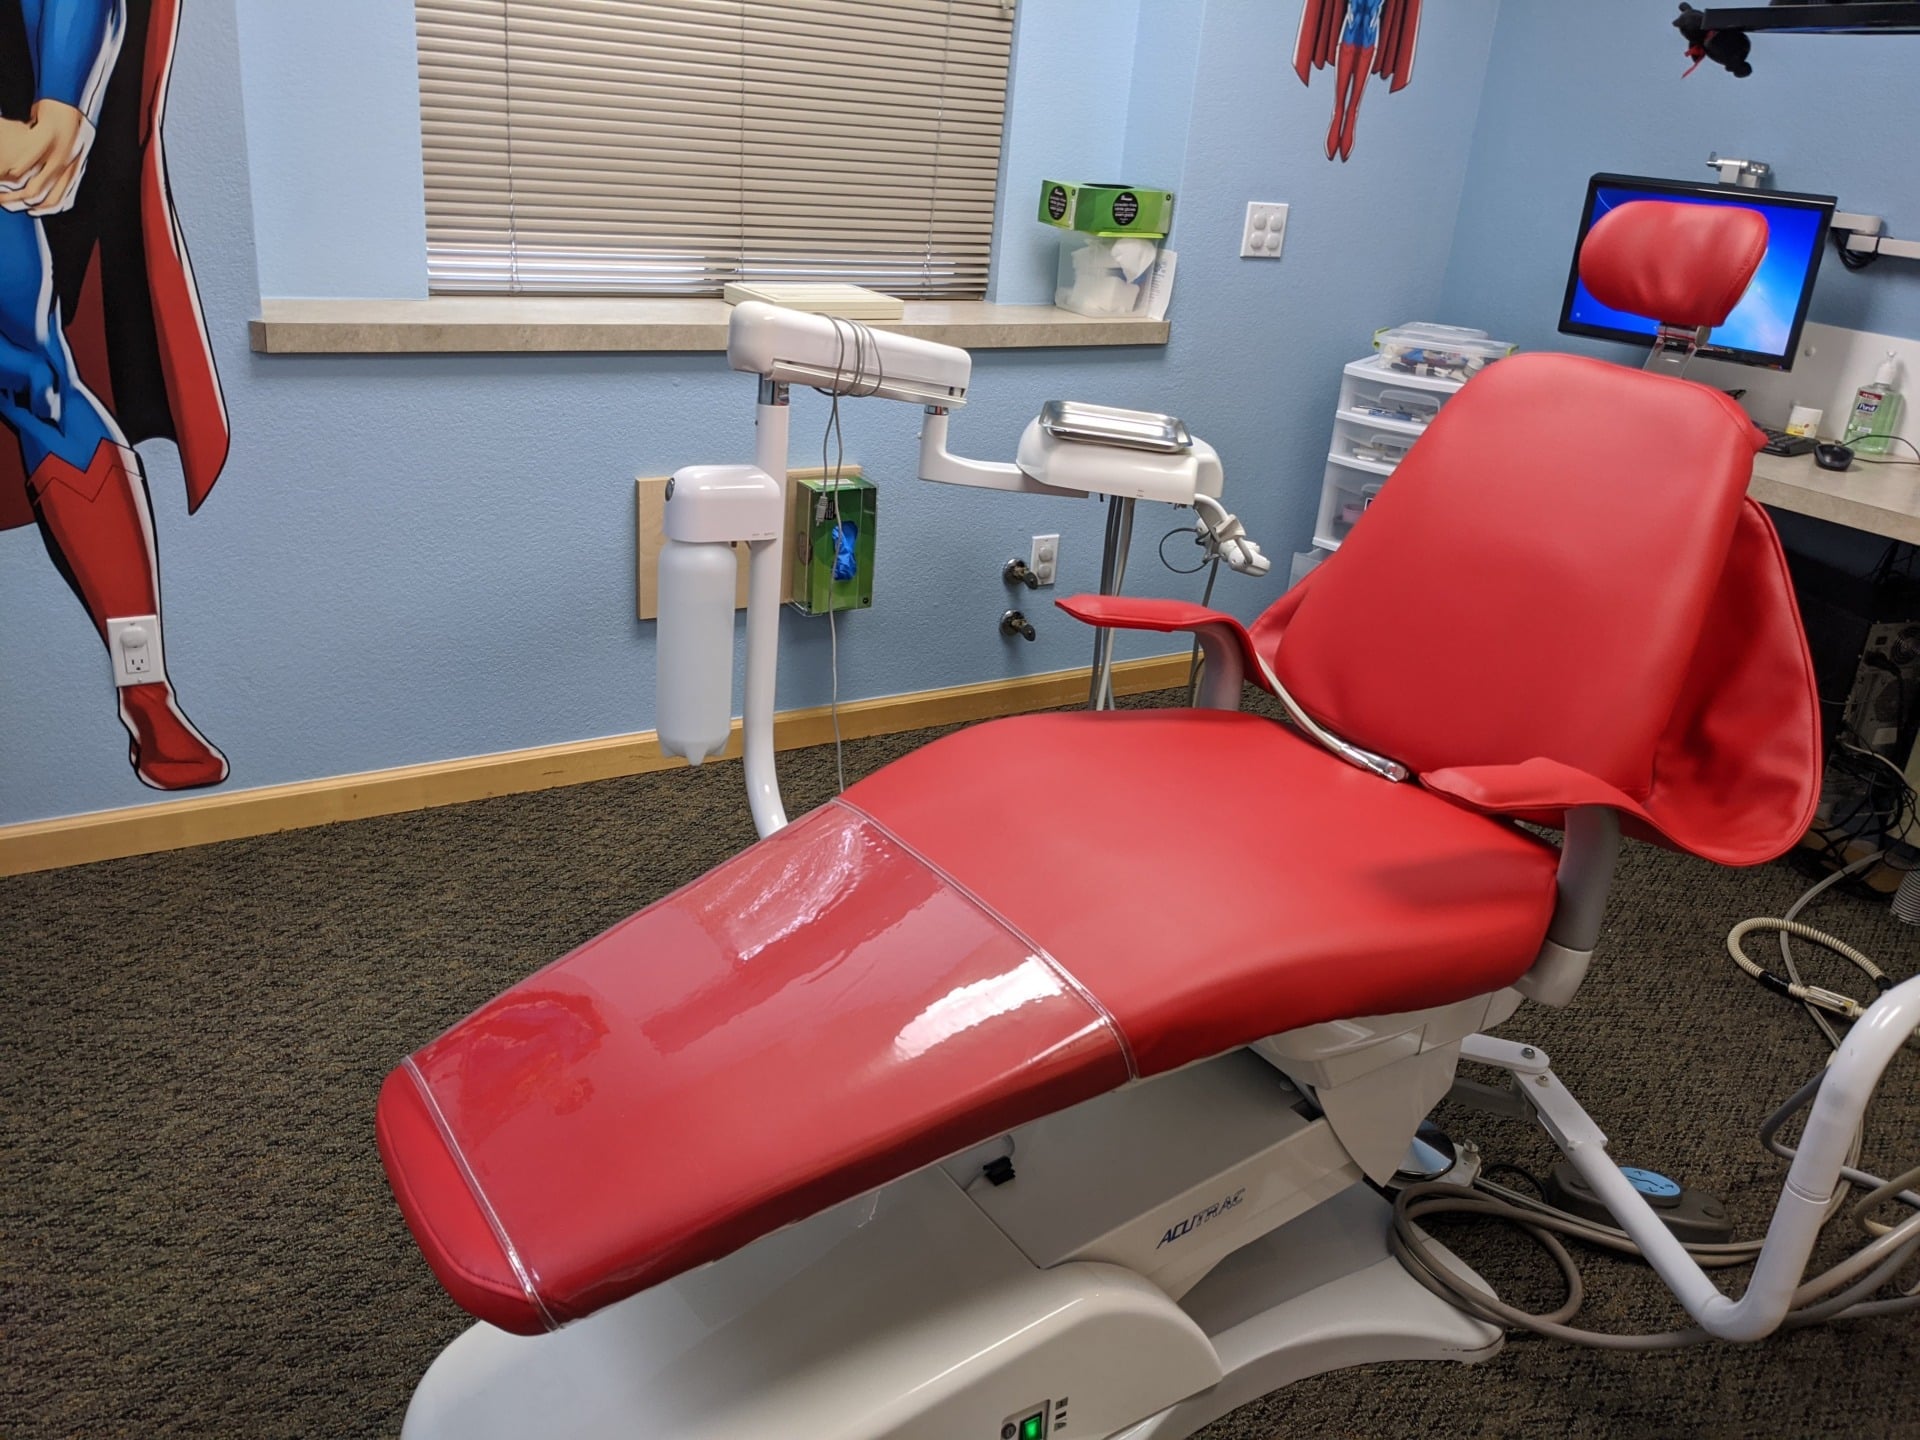 Adec Dentist Chair Olympus American Beauty Red Recover